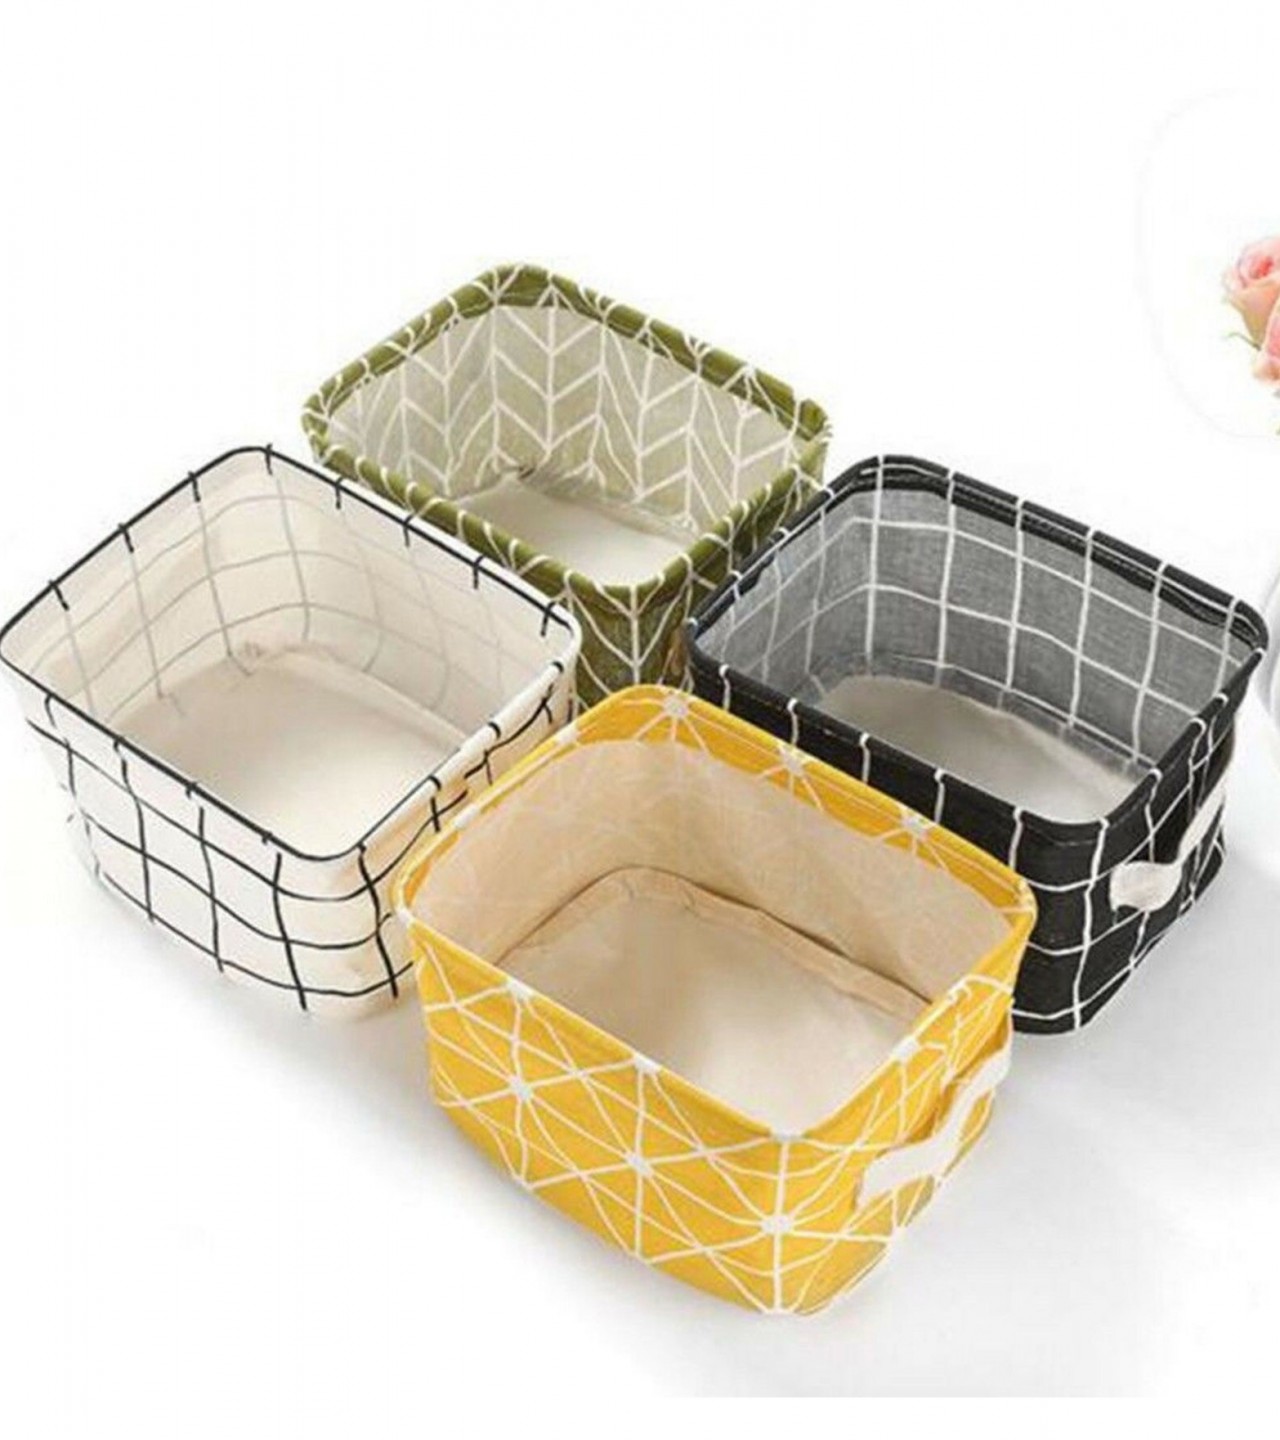 1Pcs Multipurpose Using Waterproof Folding Storage Box Basket With Handle Grip for Toys and Clothes